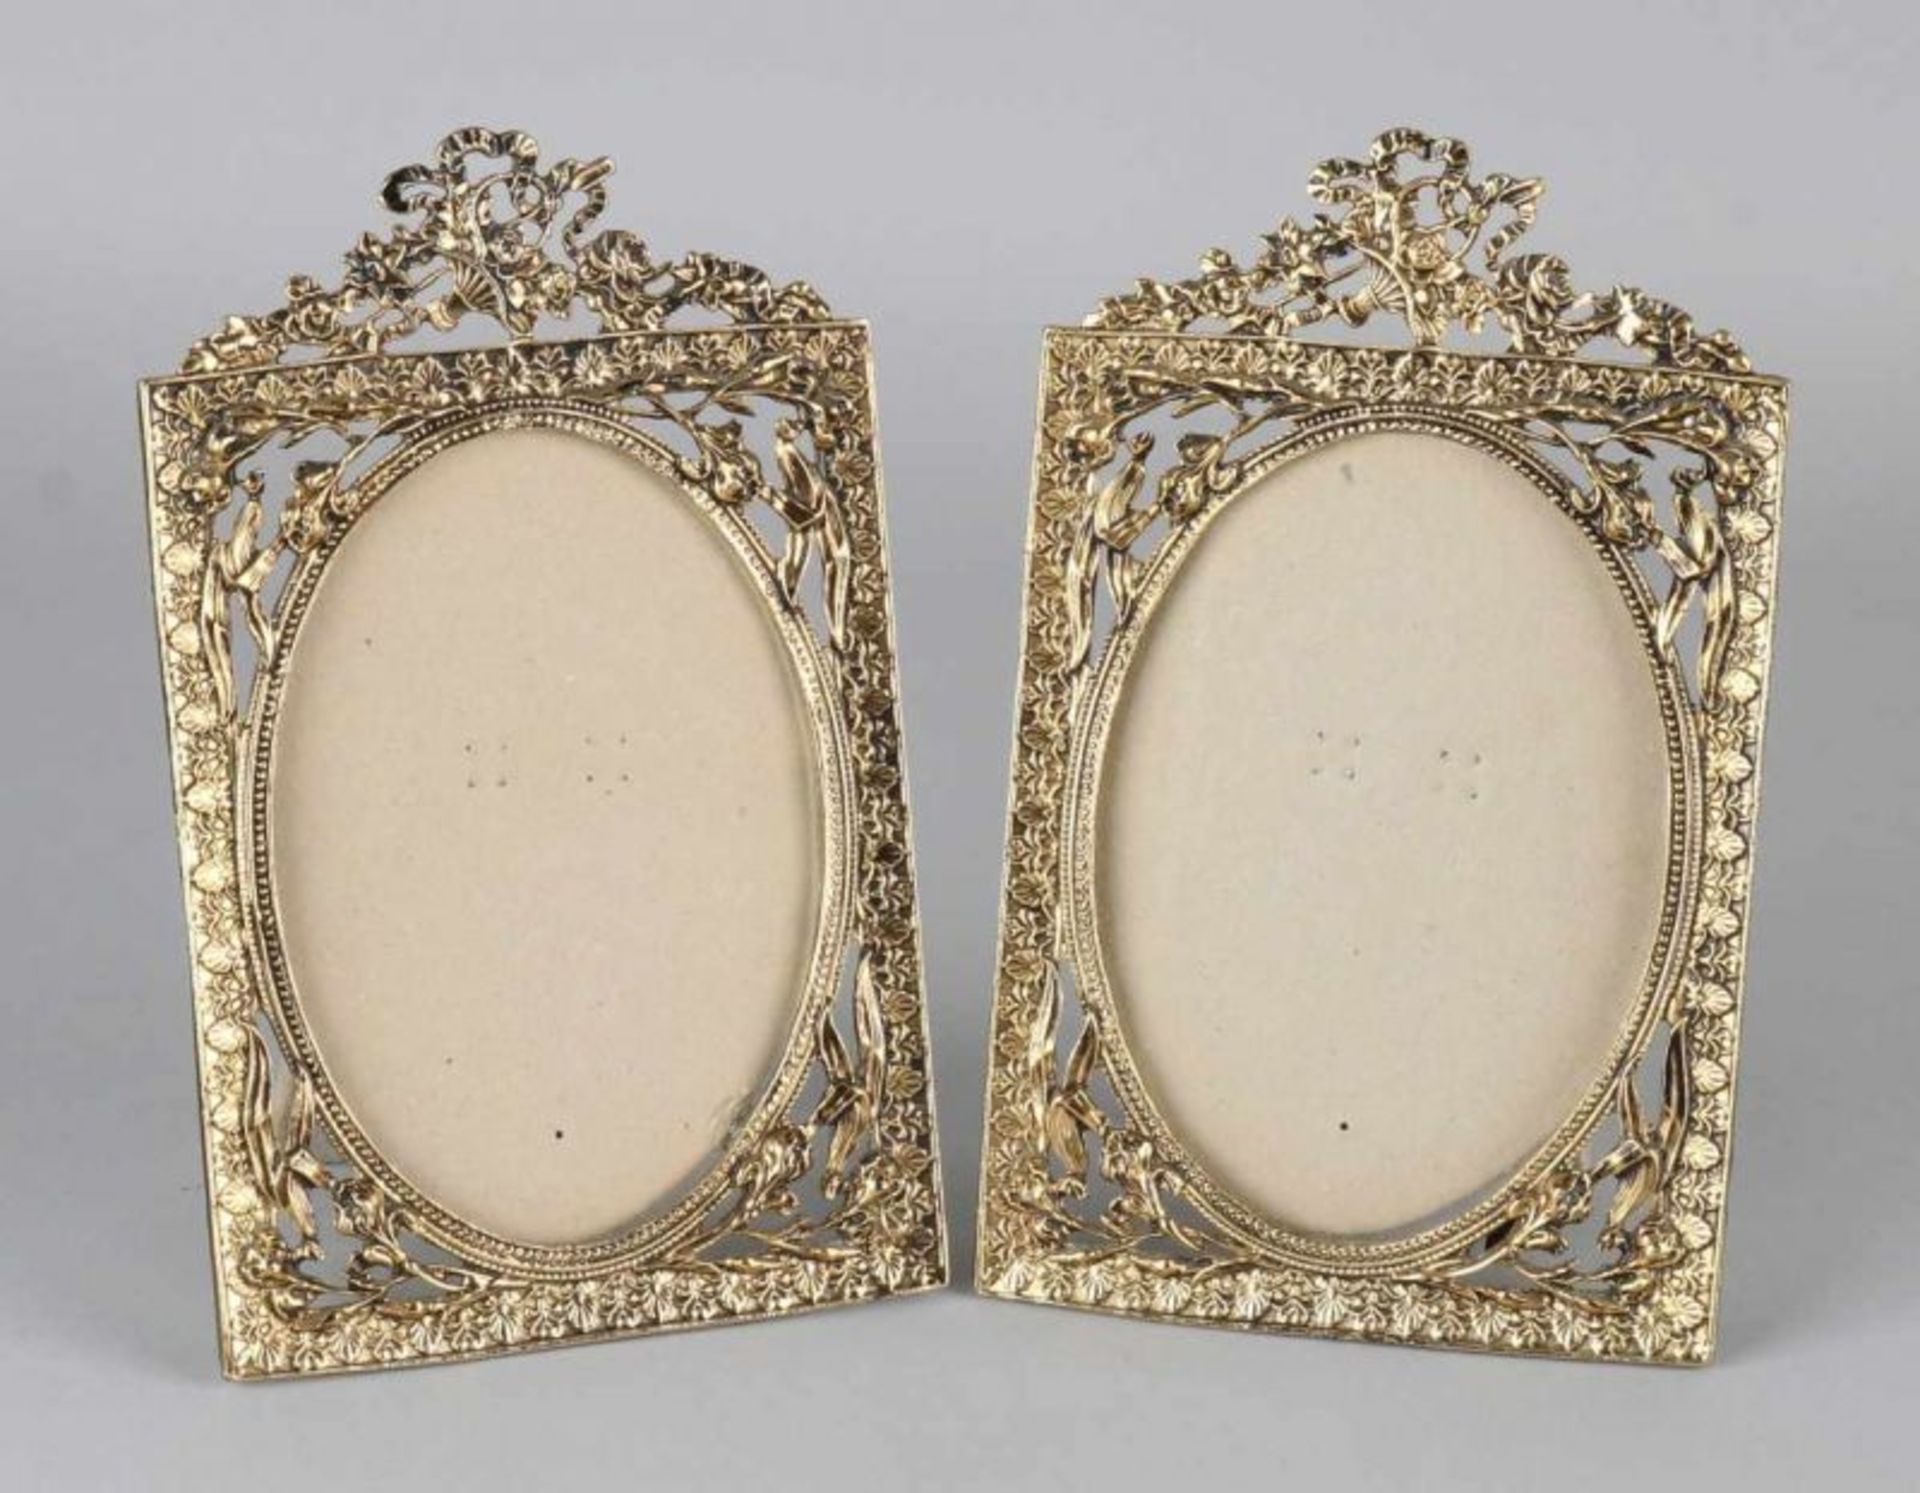 Two decorative brass photo frames in Louis Seize style. 21st century. Size: 18 x 11 cm. In good